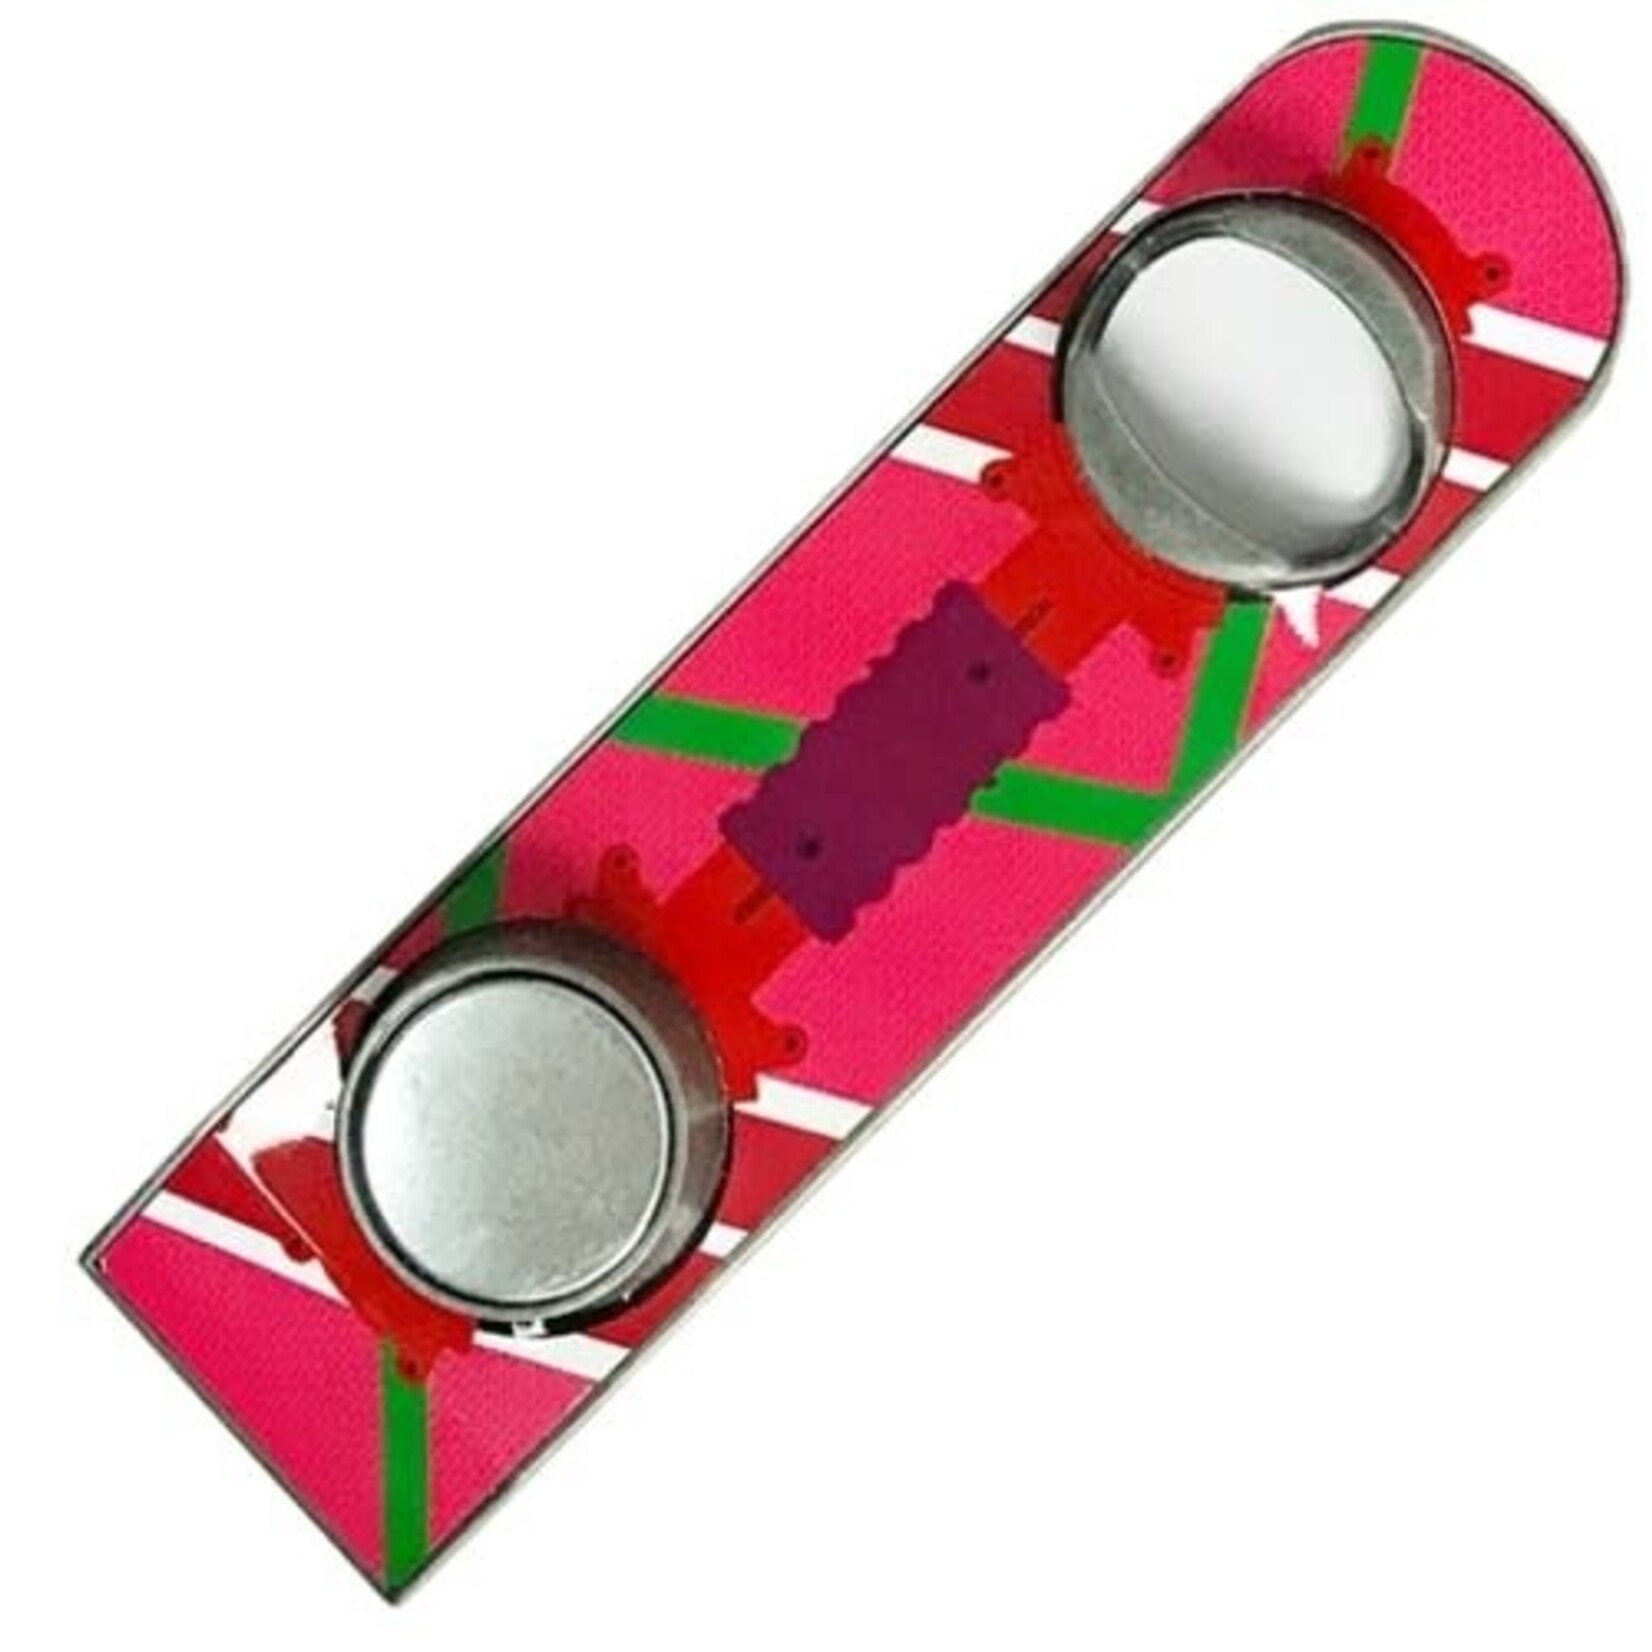 Back To The Future - Marty McFly Hover Board - Bottle Opener (NEW)